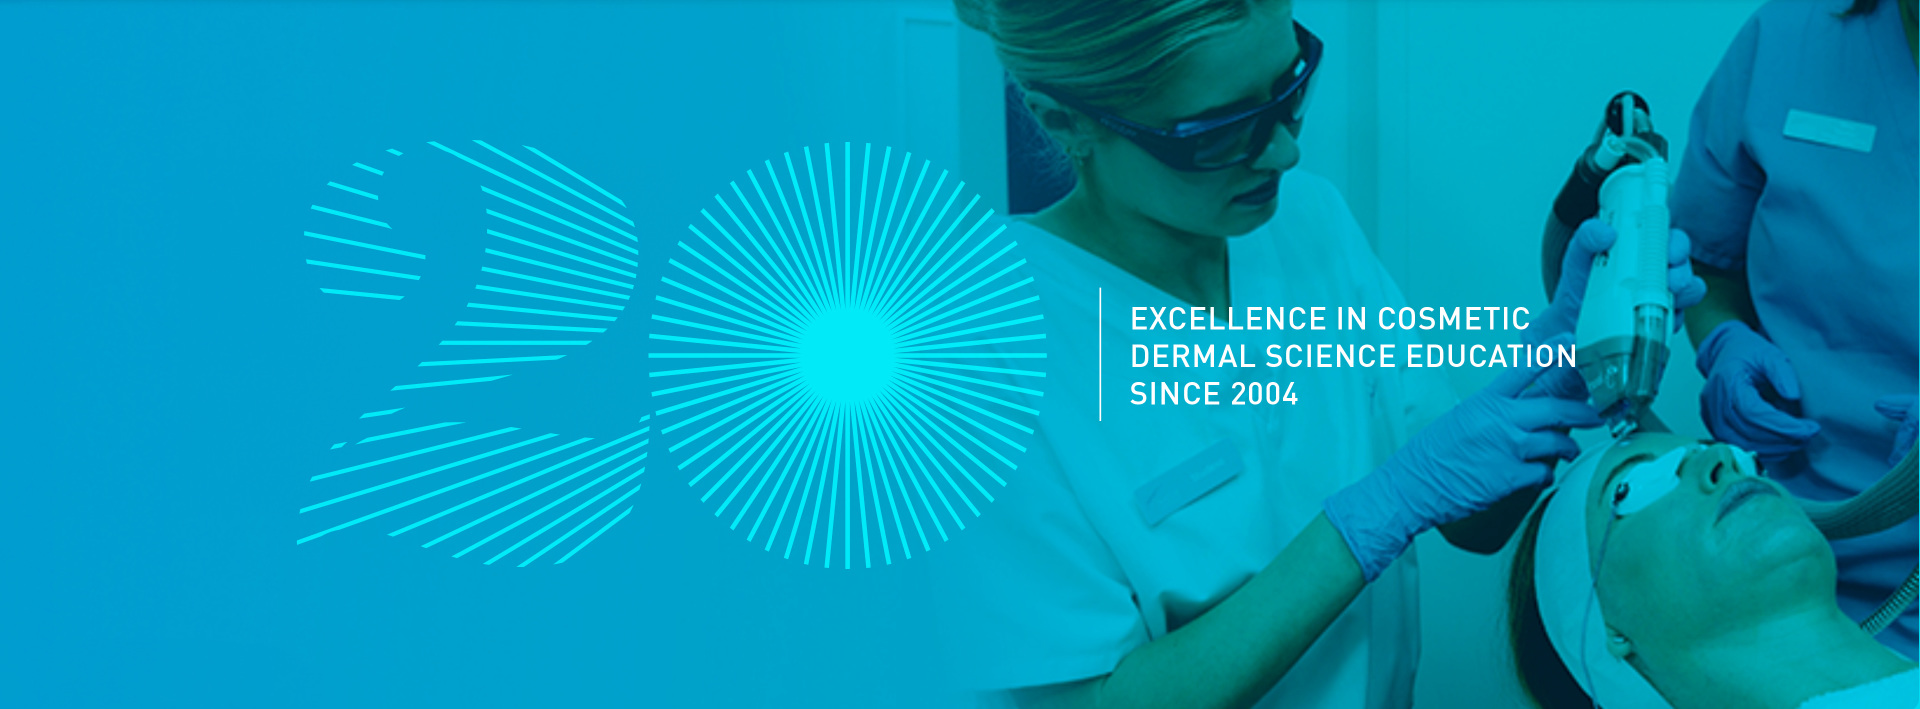 20 years - Excellence in Cosmetic Dermal Science Education since 2004